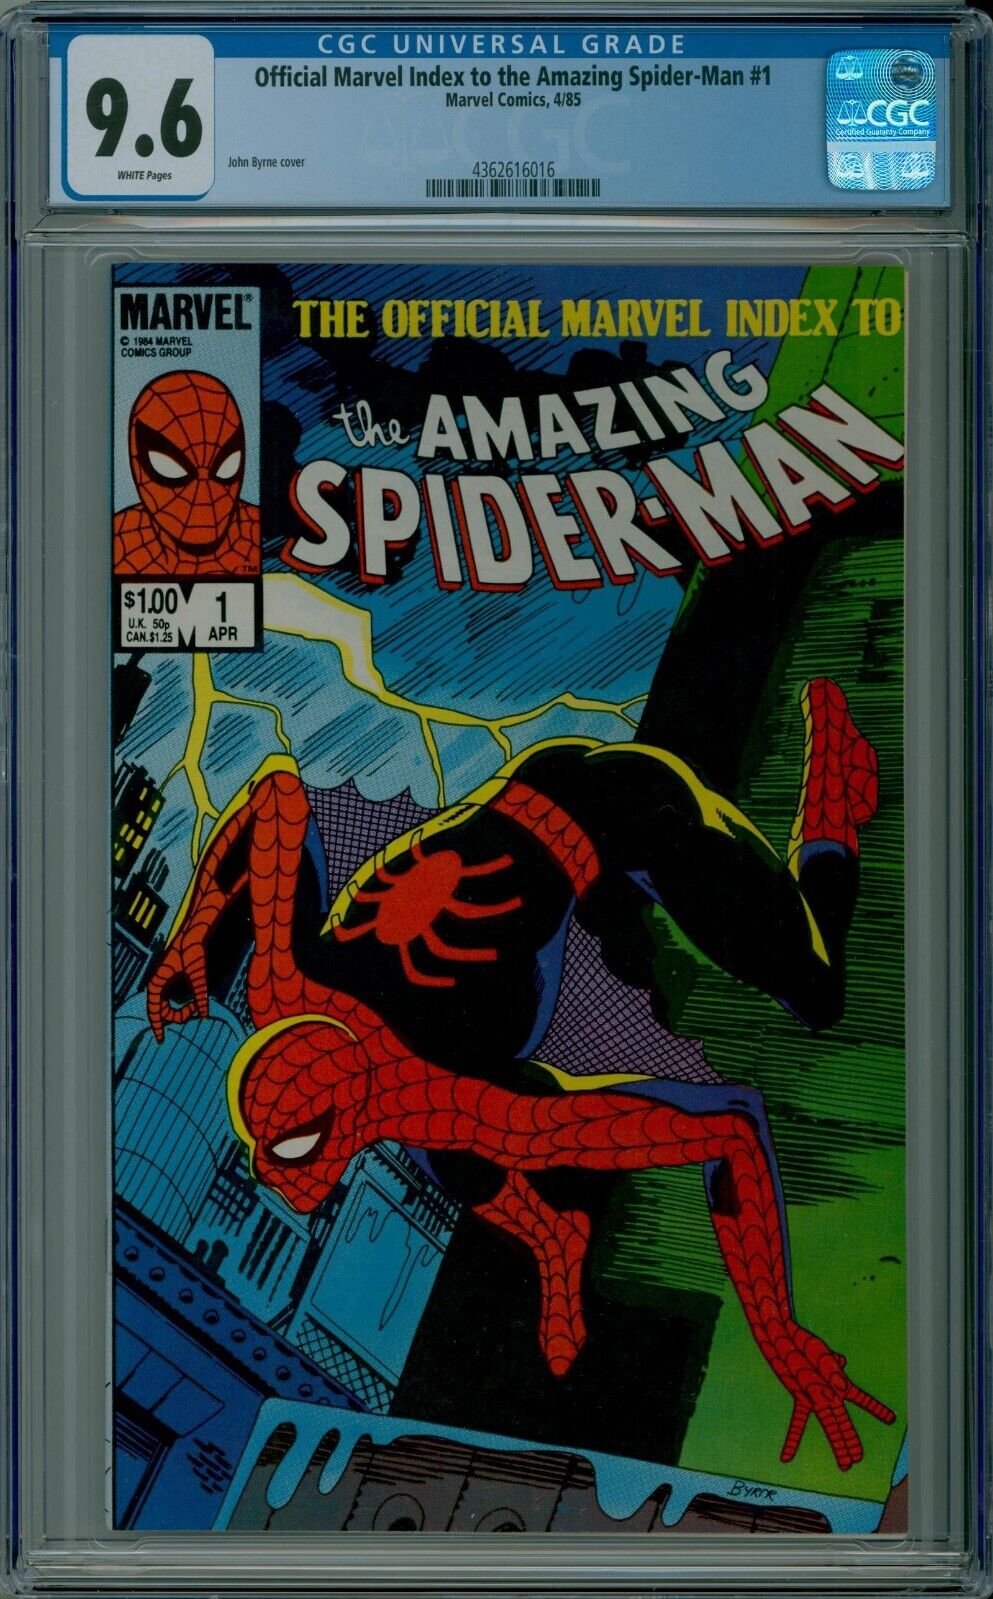 Official Marvel Index to the Amazing Spider-Man 1 CGC 9.6 white pages 4362616016